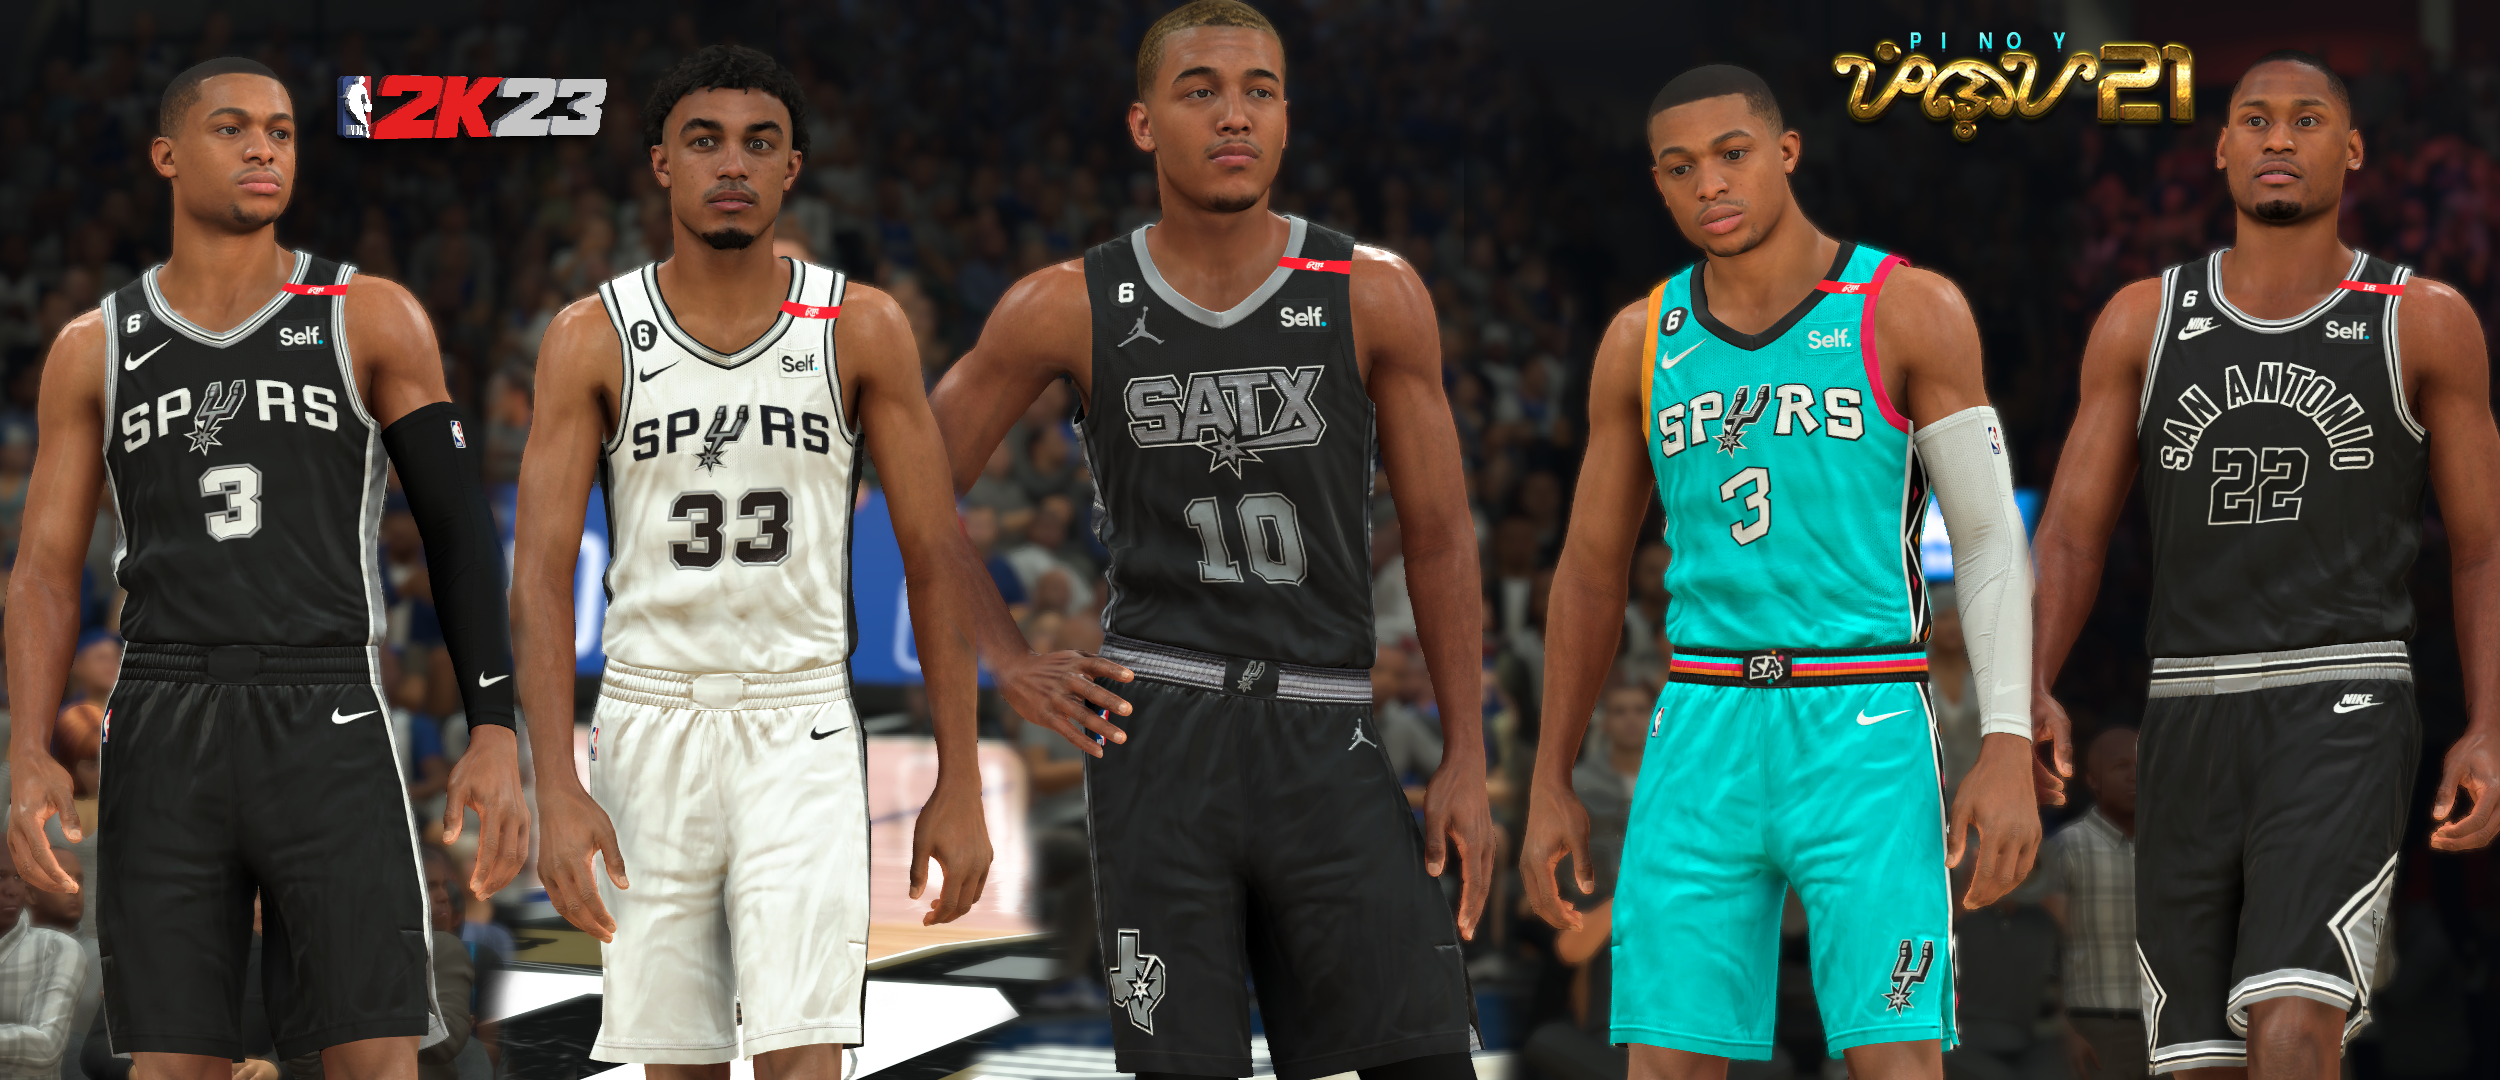 Report: Spurs “City Edition” jersey revealed - Pounding The Rock